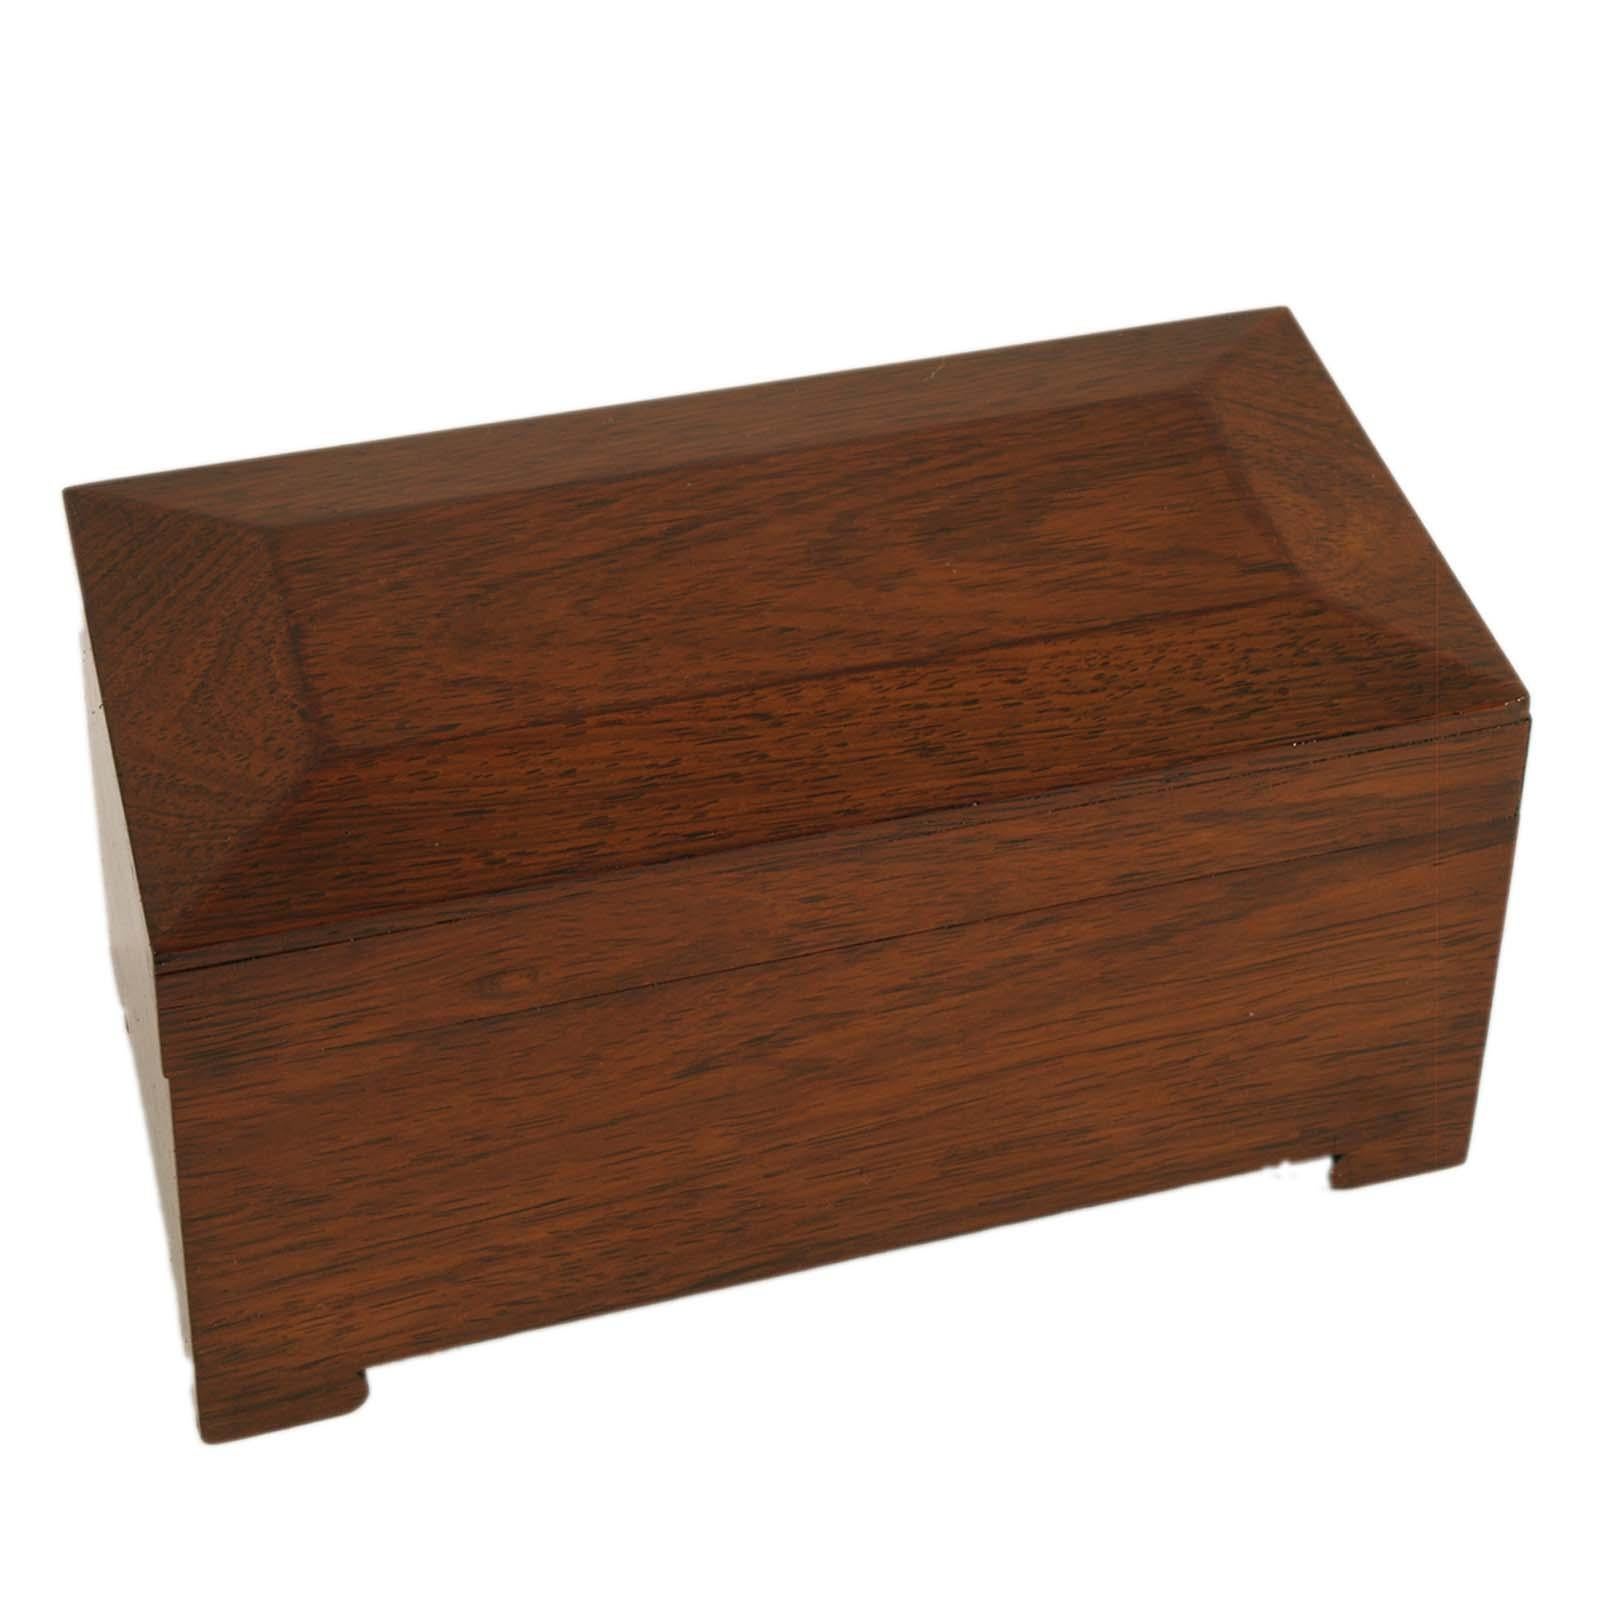 Small trunk from the 1960s in mahogany used as a jewelery box 

About Tommaso Barbi

Tommaso Barbi is an Italian Postwar & Contemporary artist who was born in the 20th Century. Tommaso Barbi's work has been offered at auction multiple times,